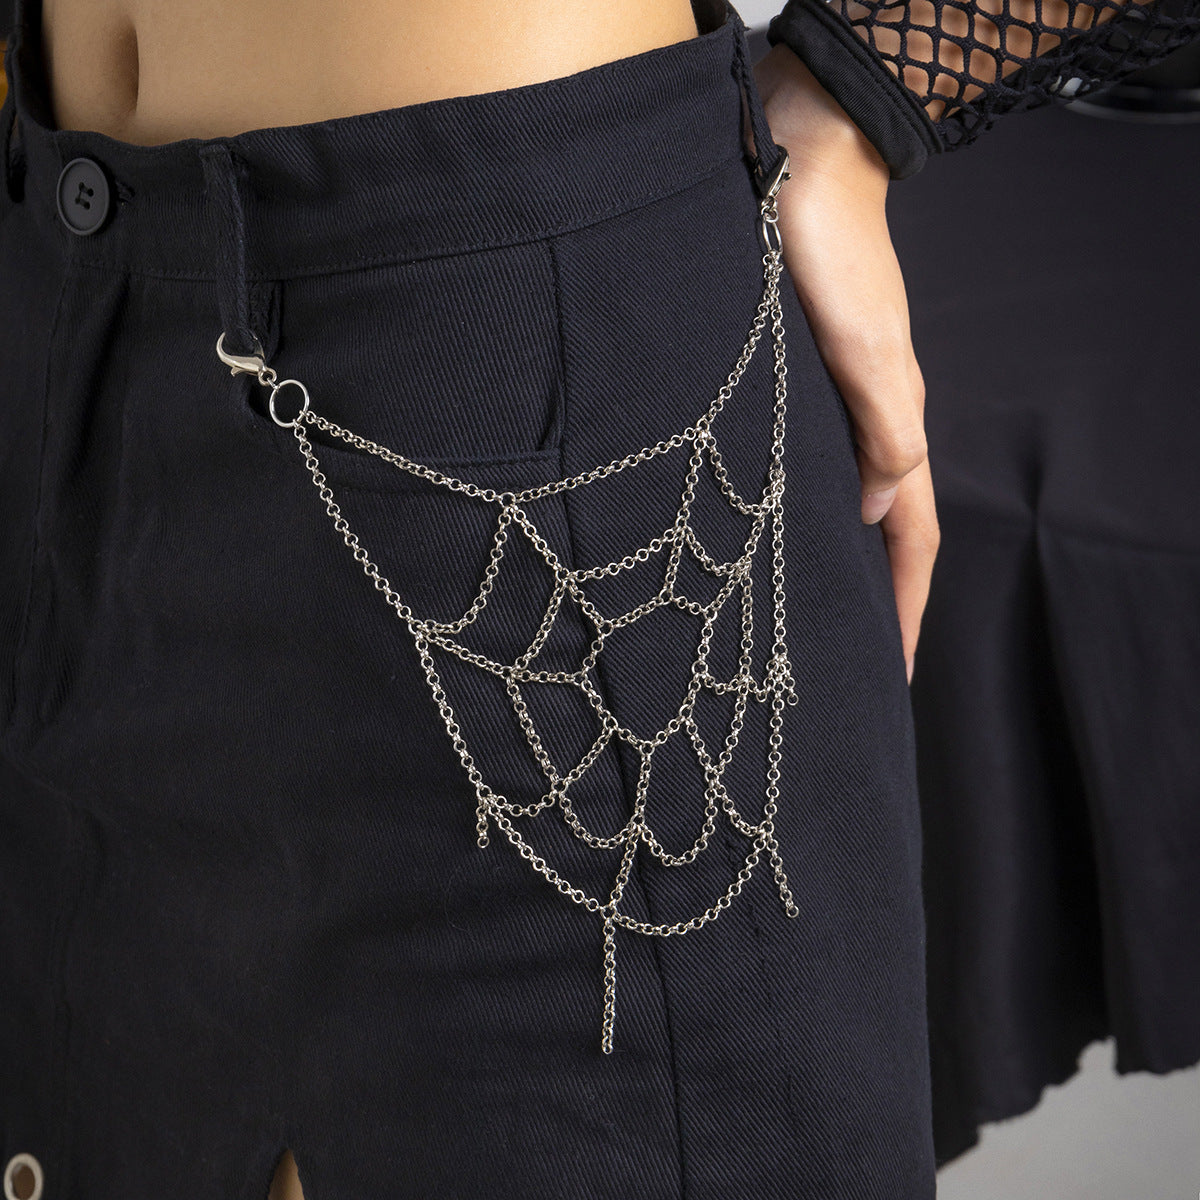 Sweet Cool Hot Girl Style Chain Body Clothing Chain Gothic Style Punk Spider Mesh Pants Zipper